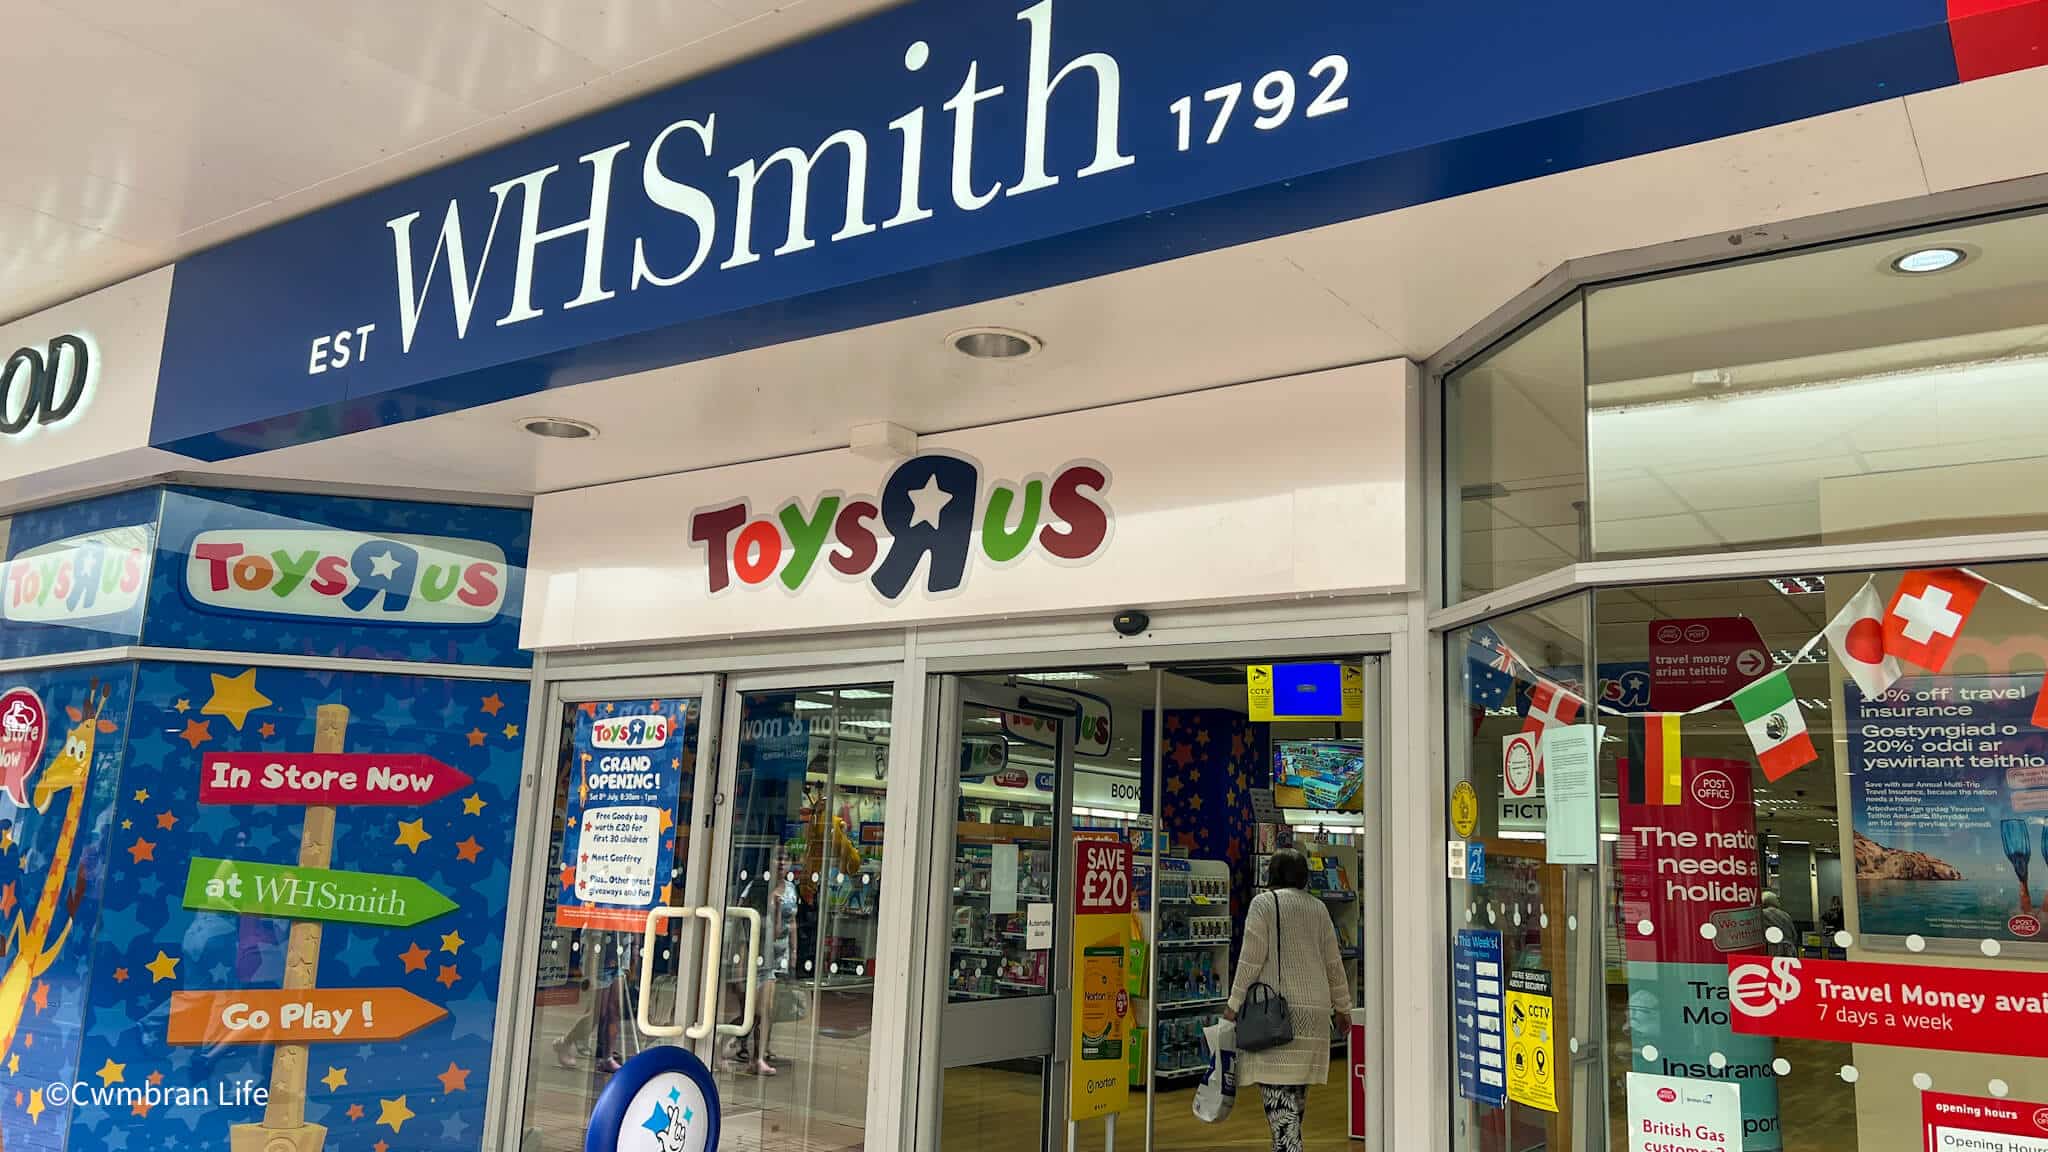 The entrance to a WHSmith store